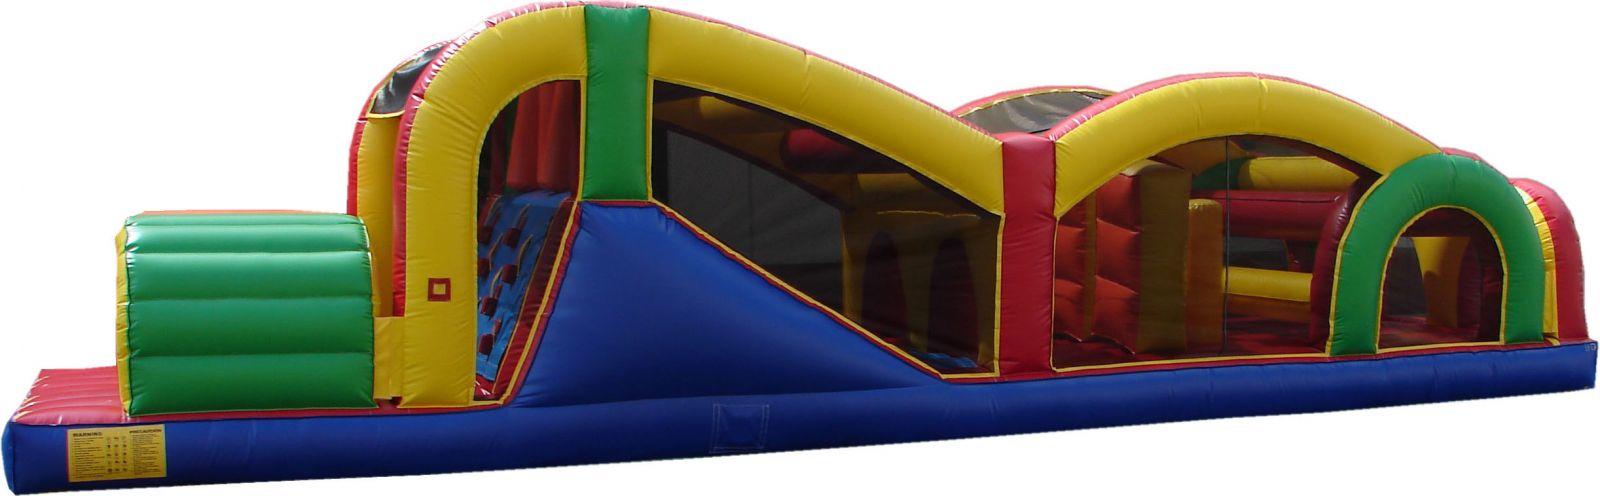 Rush Obstacle Course Rental Chicago, Chicago Inflatable Obstacle Rental